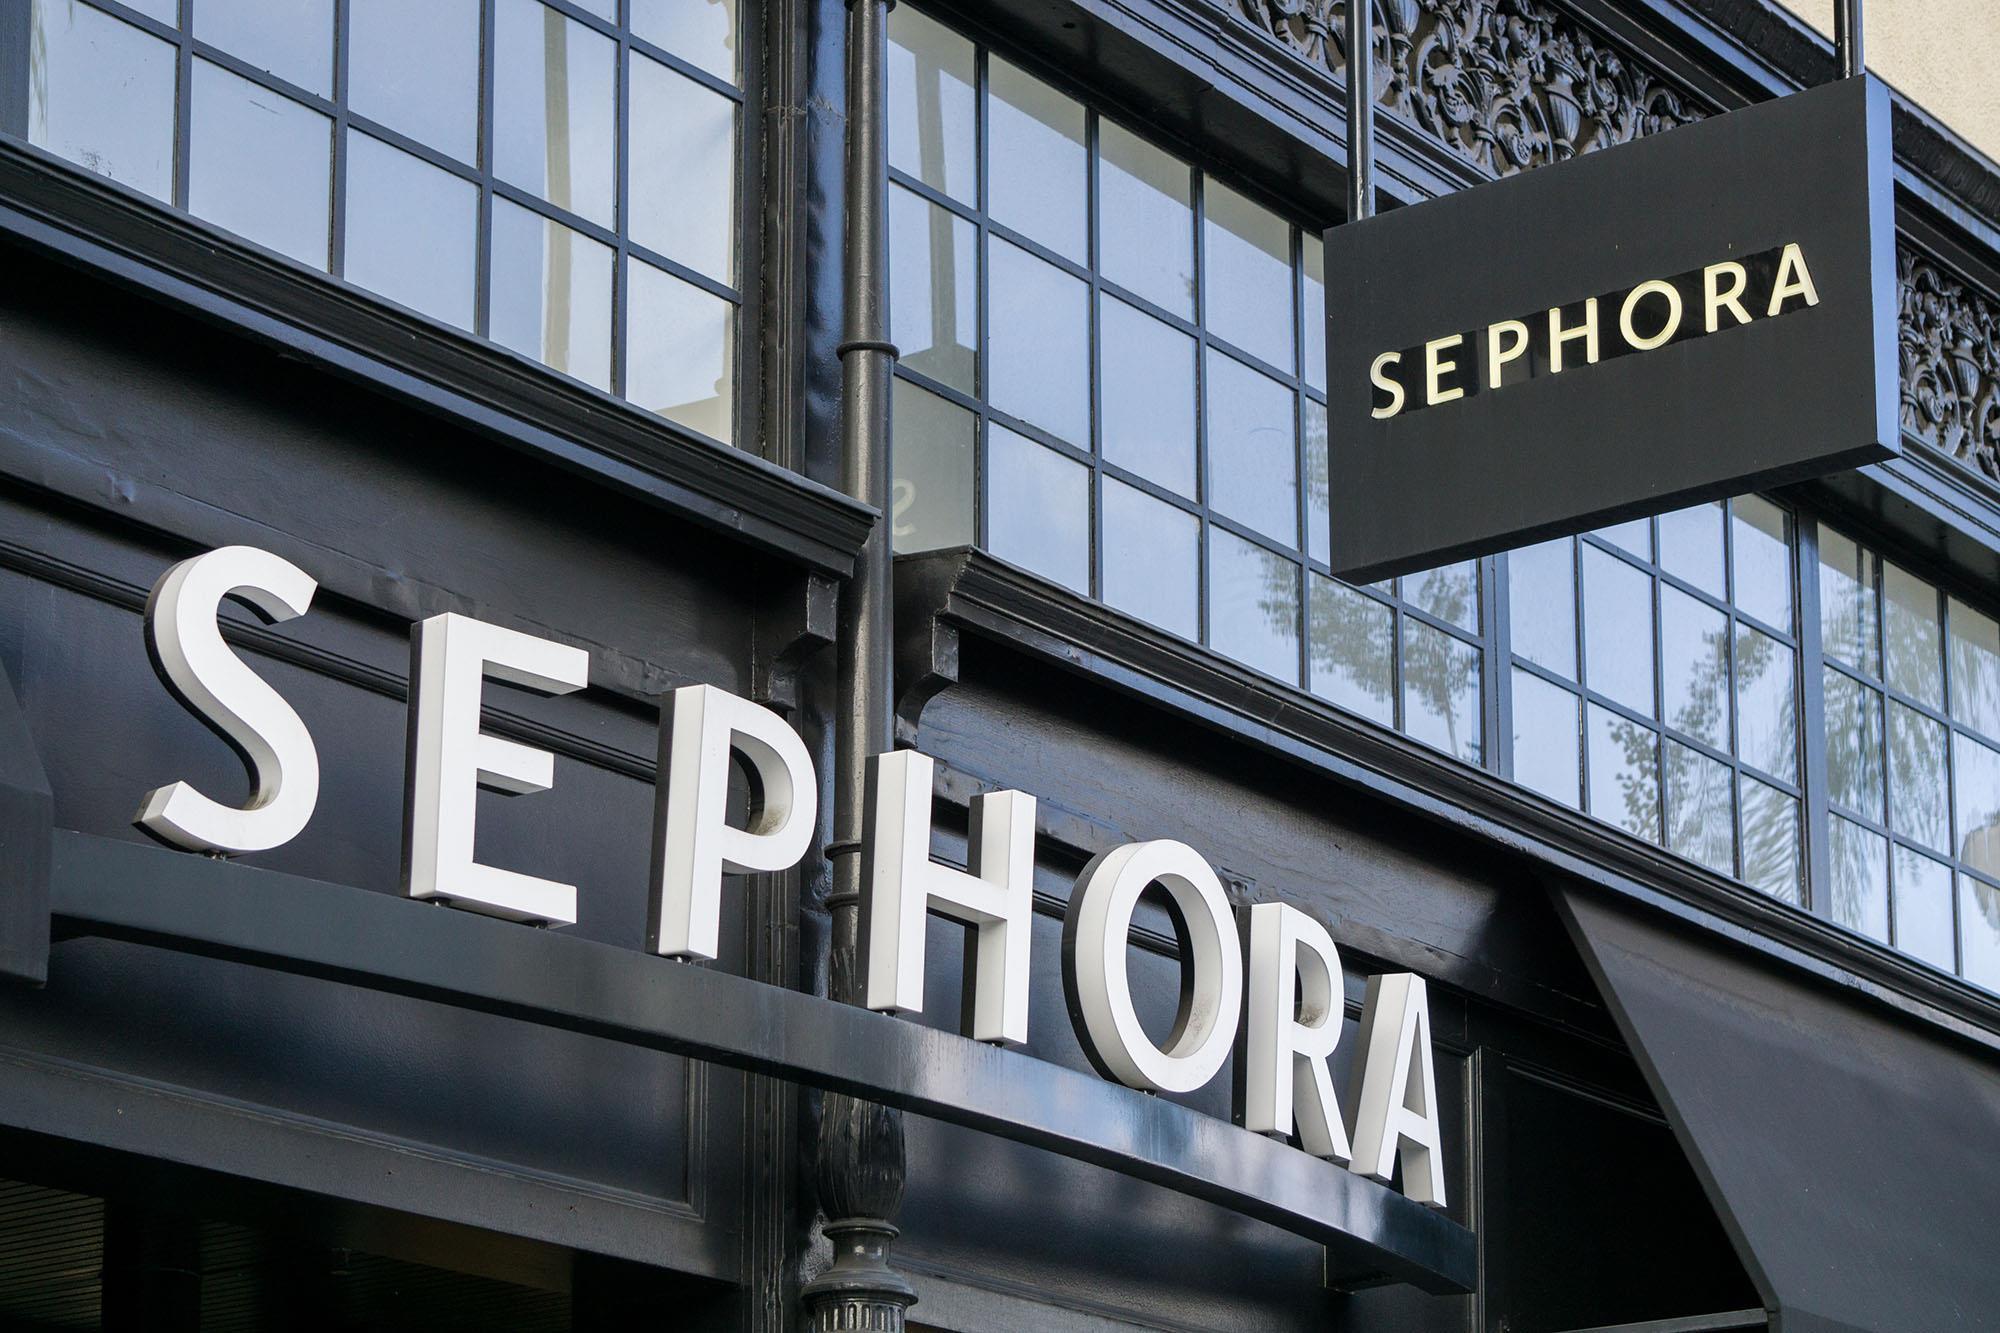 Sephora fined $1.2M in first public CCPA enforcement